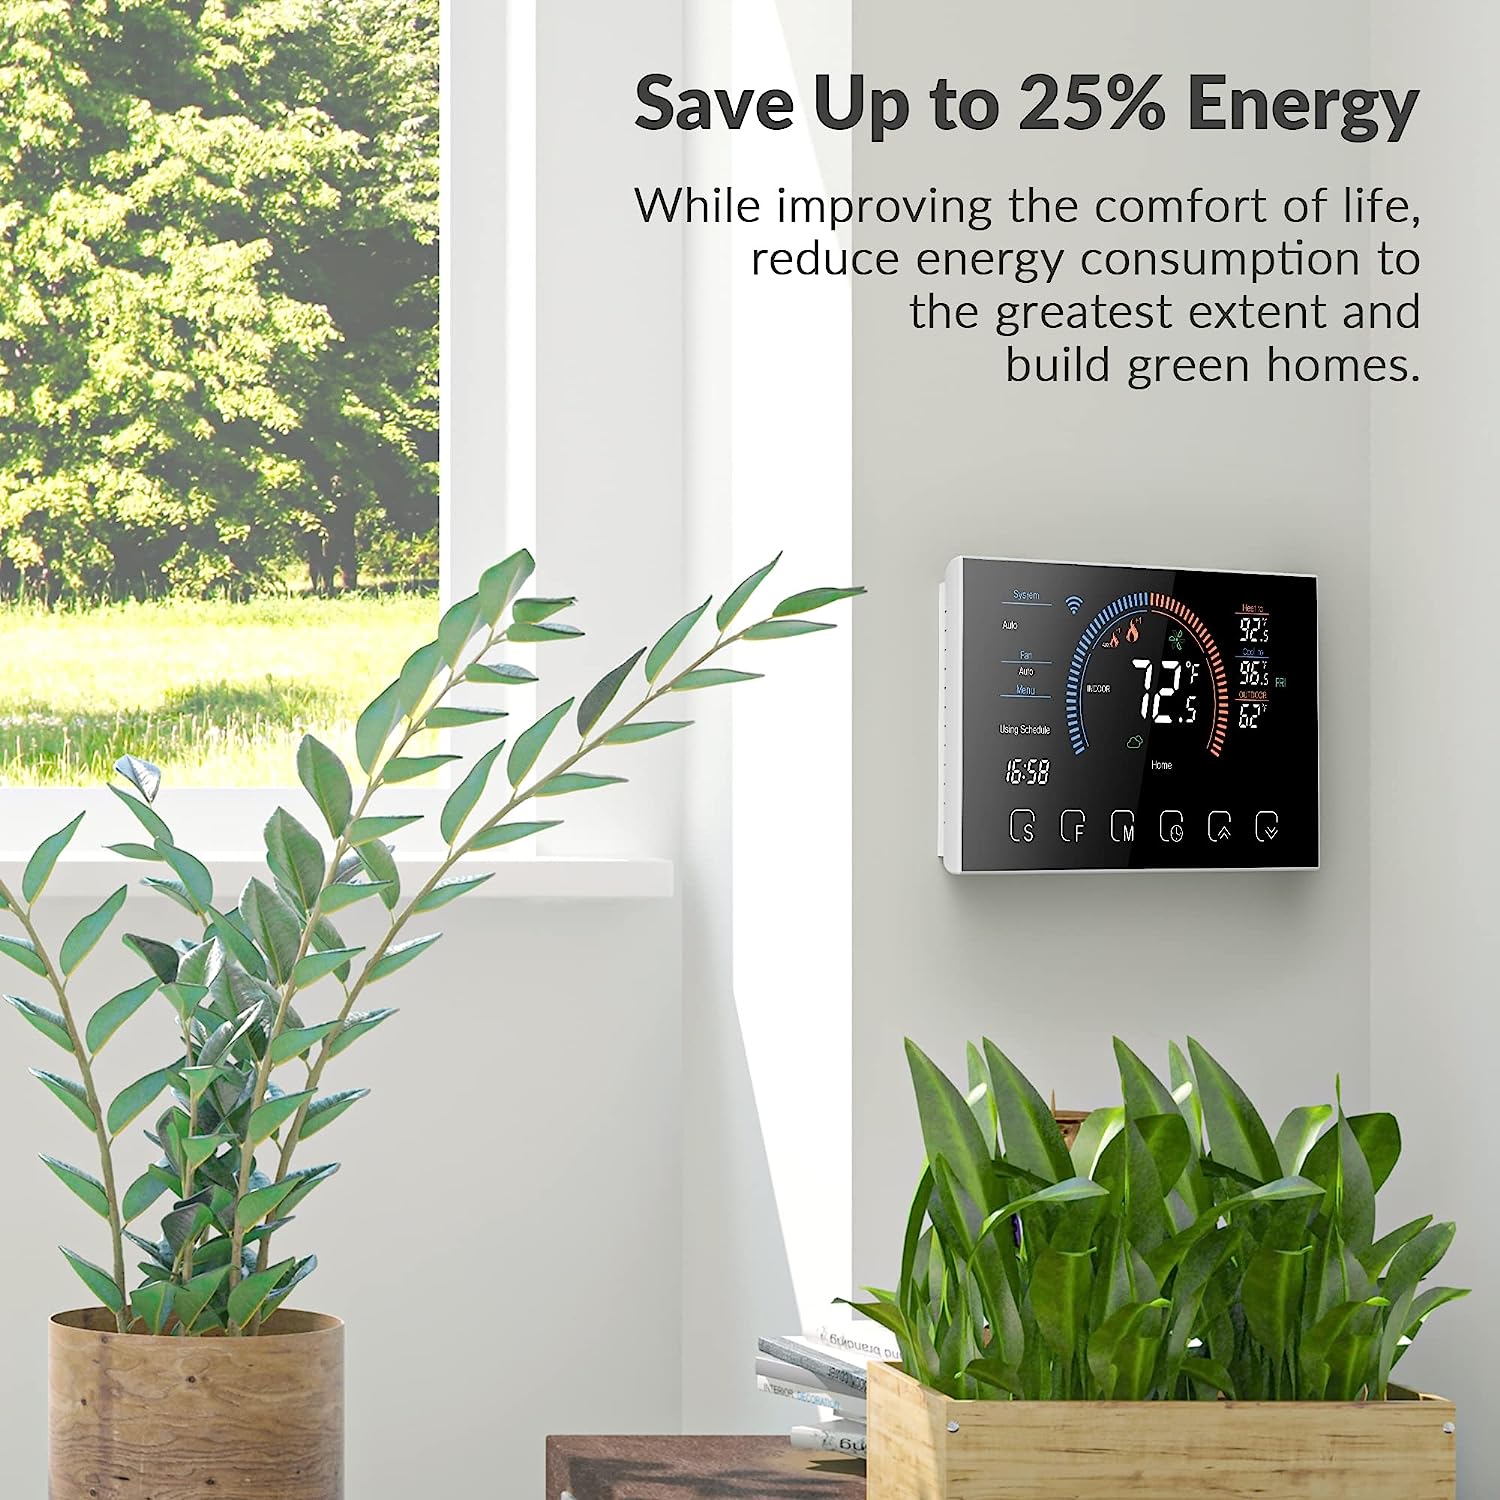 Smart Thermostat for Home, WiFi Programmable Digital Thermostat, Energy Saving, C-Wire Required, DIY Install, Black